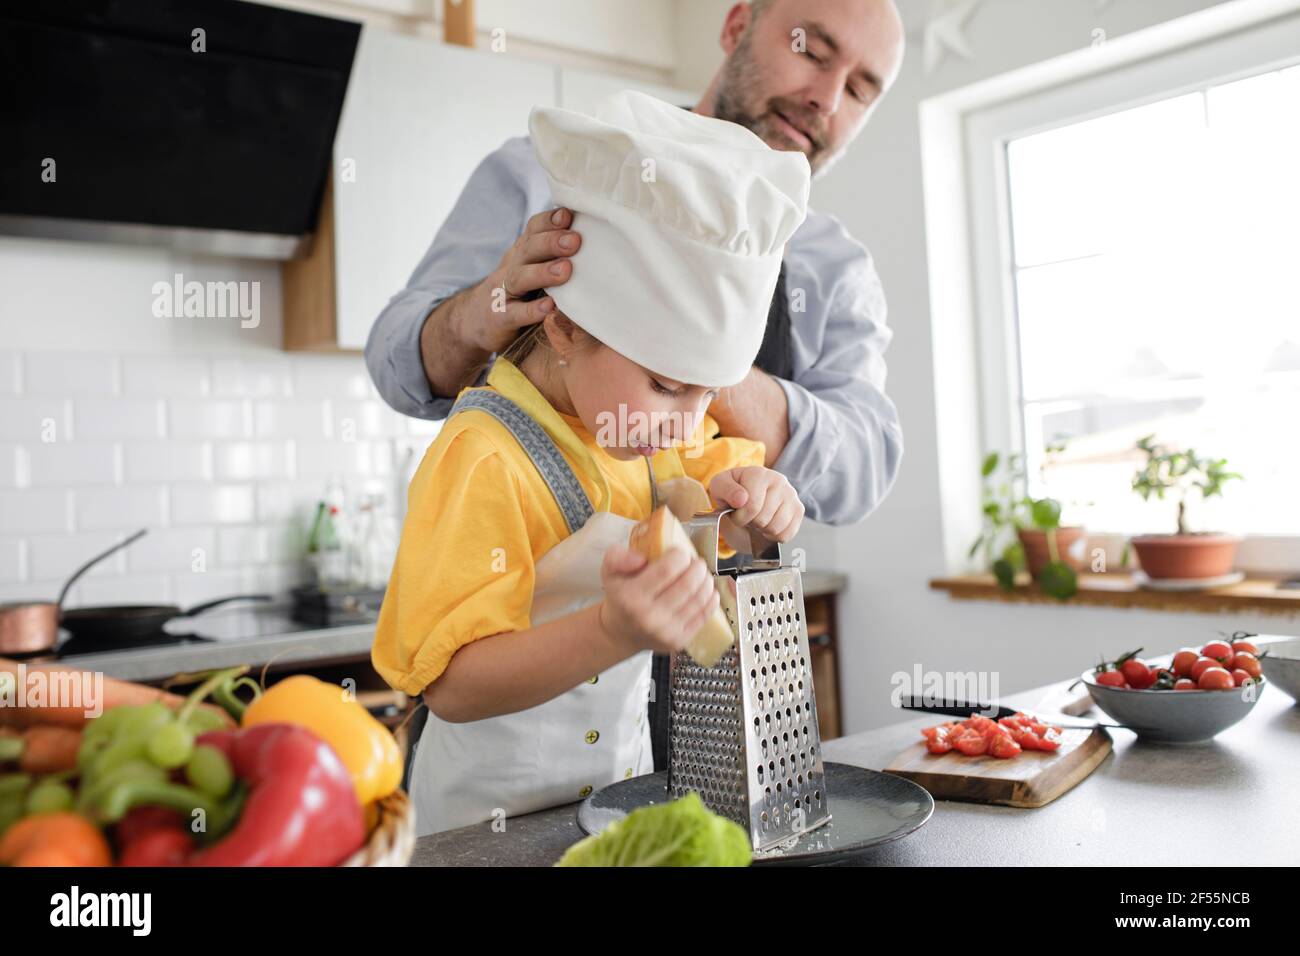 Mature men adjusting girl chef's hat while standing at kitchen Stock Photo